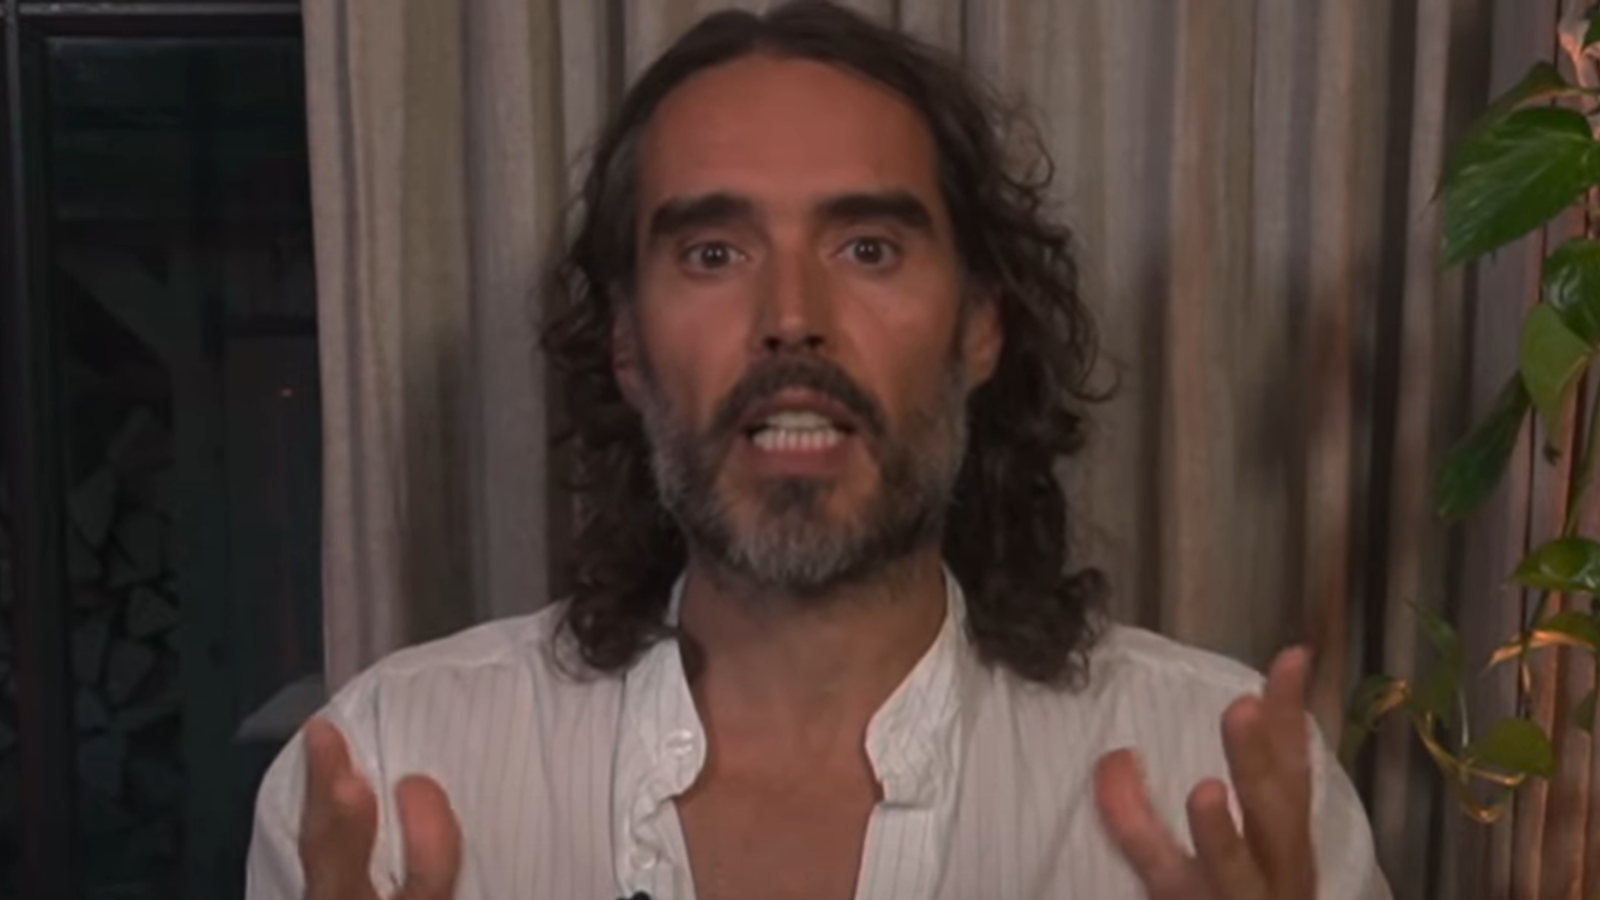 Informal complaints about Russell Brand at Channel 4 'not properly escalated', investigation finds